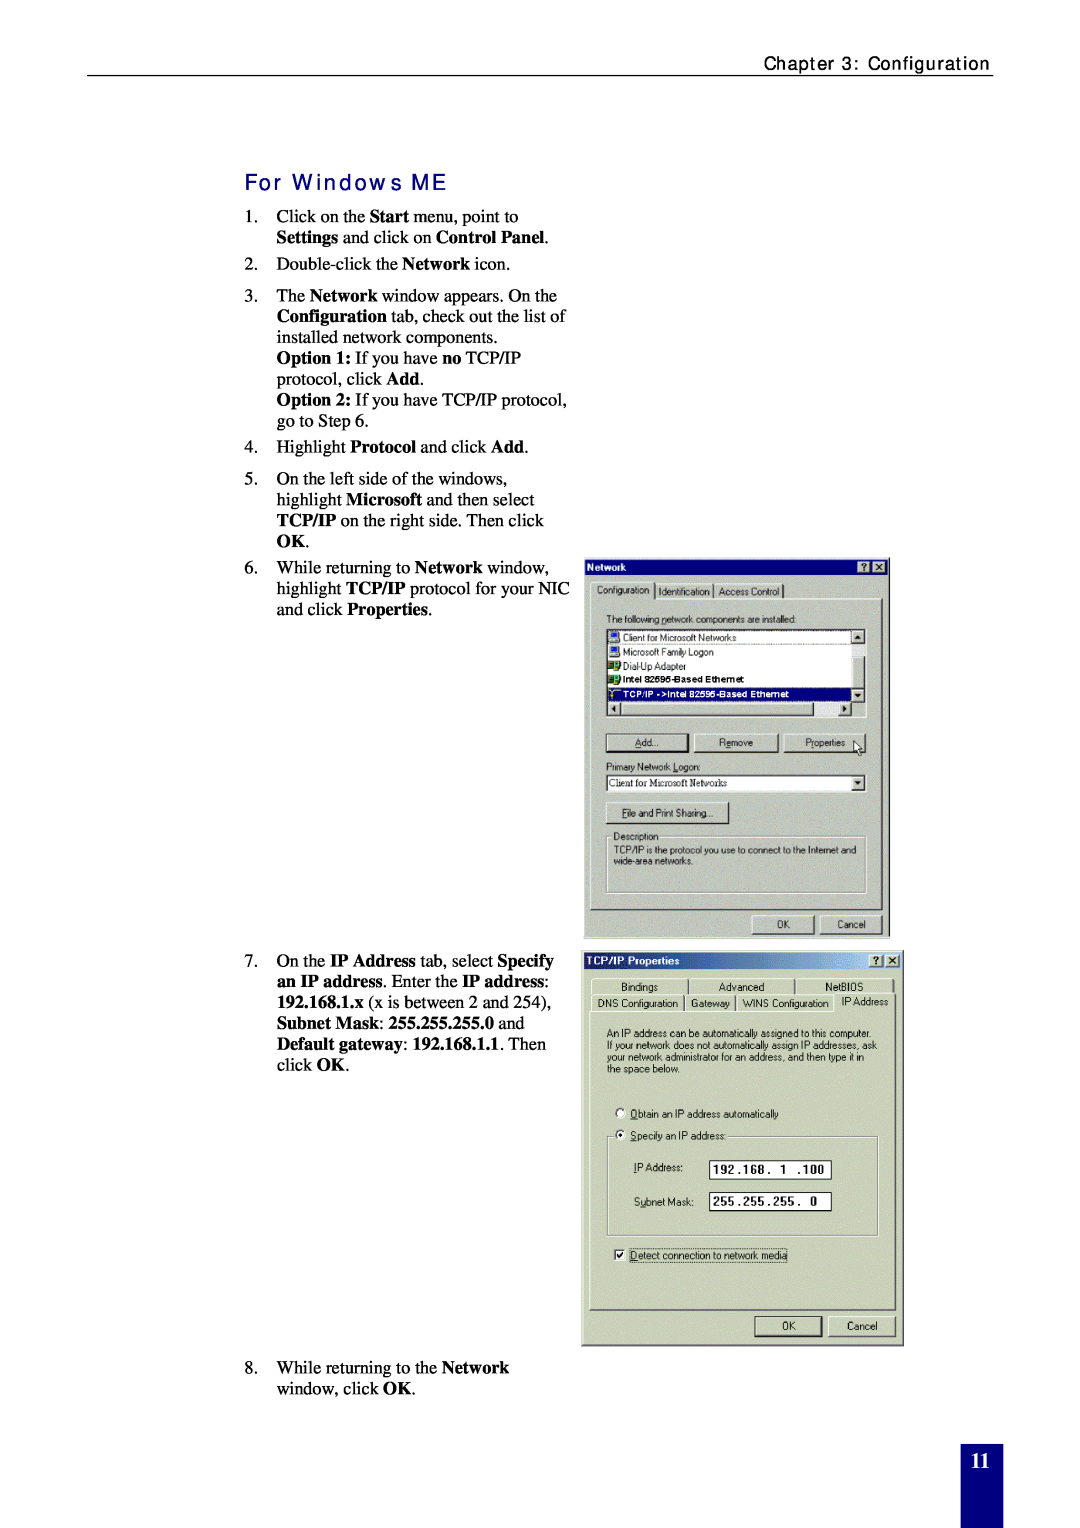 Dynalink RTA770W user manual For Windows ME, Configuration 